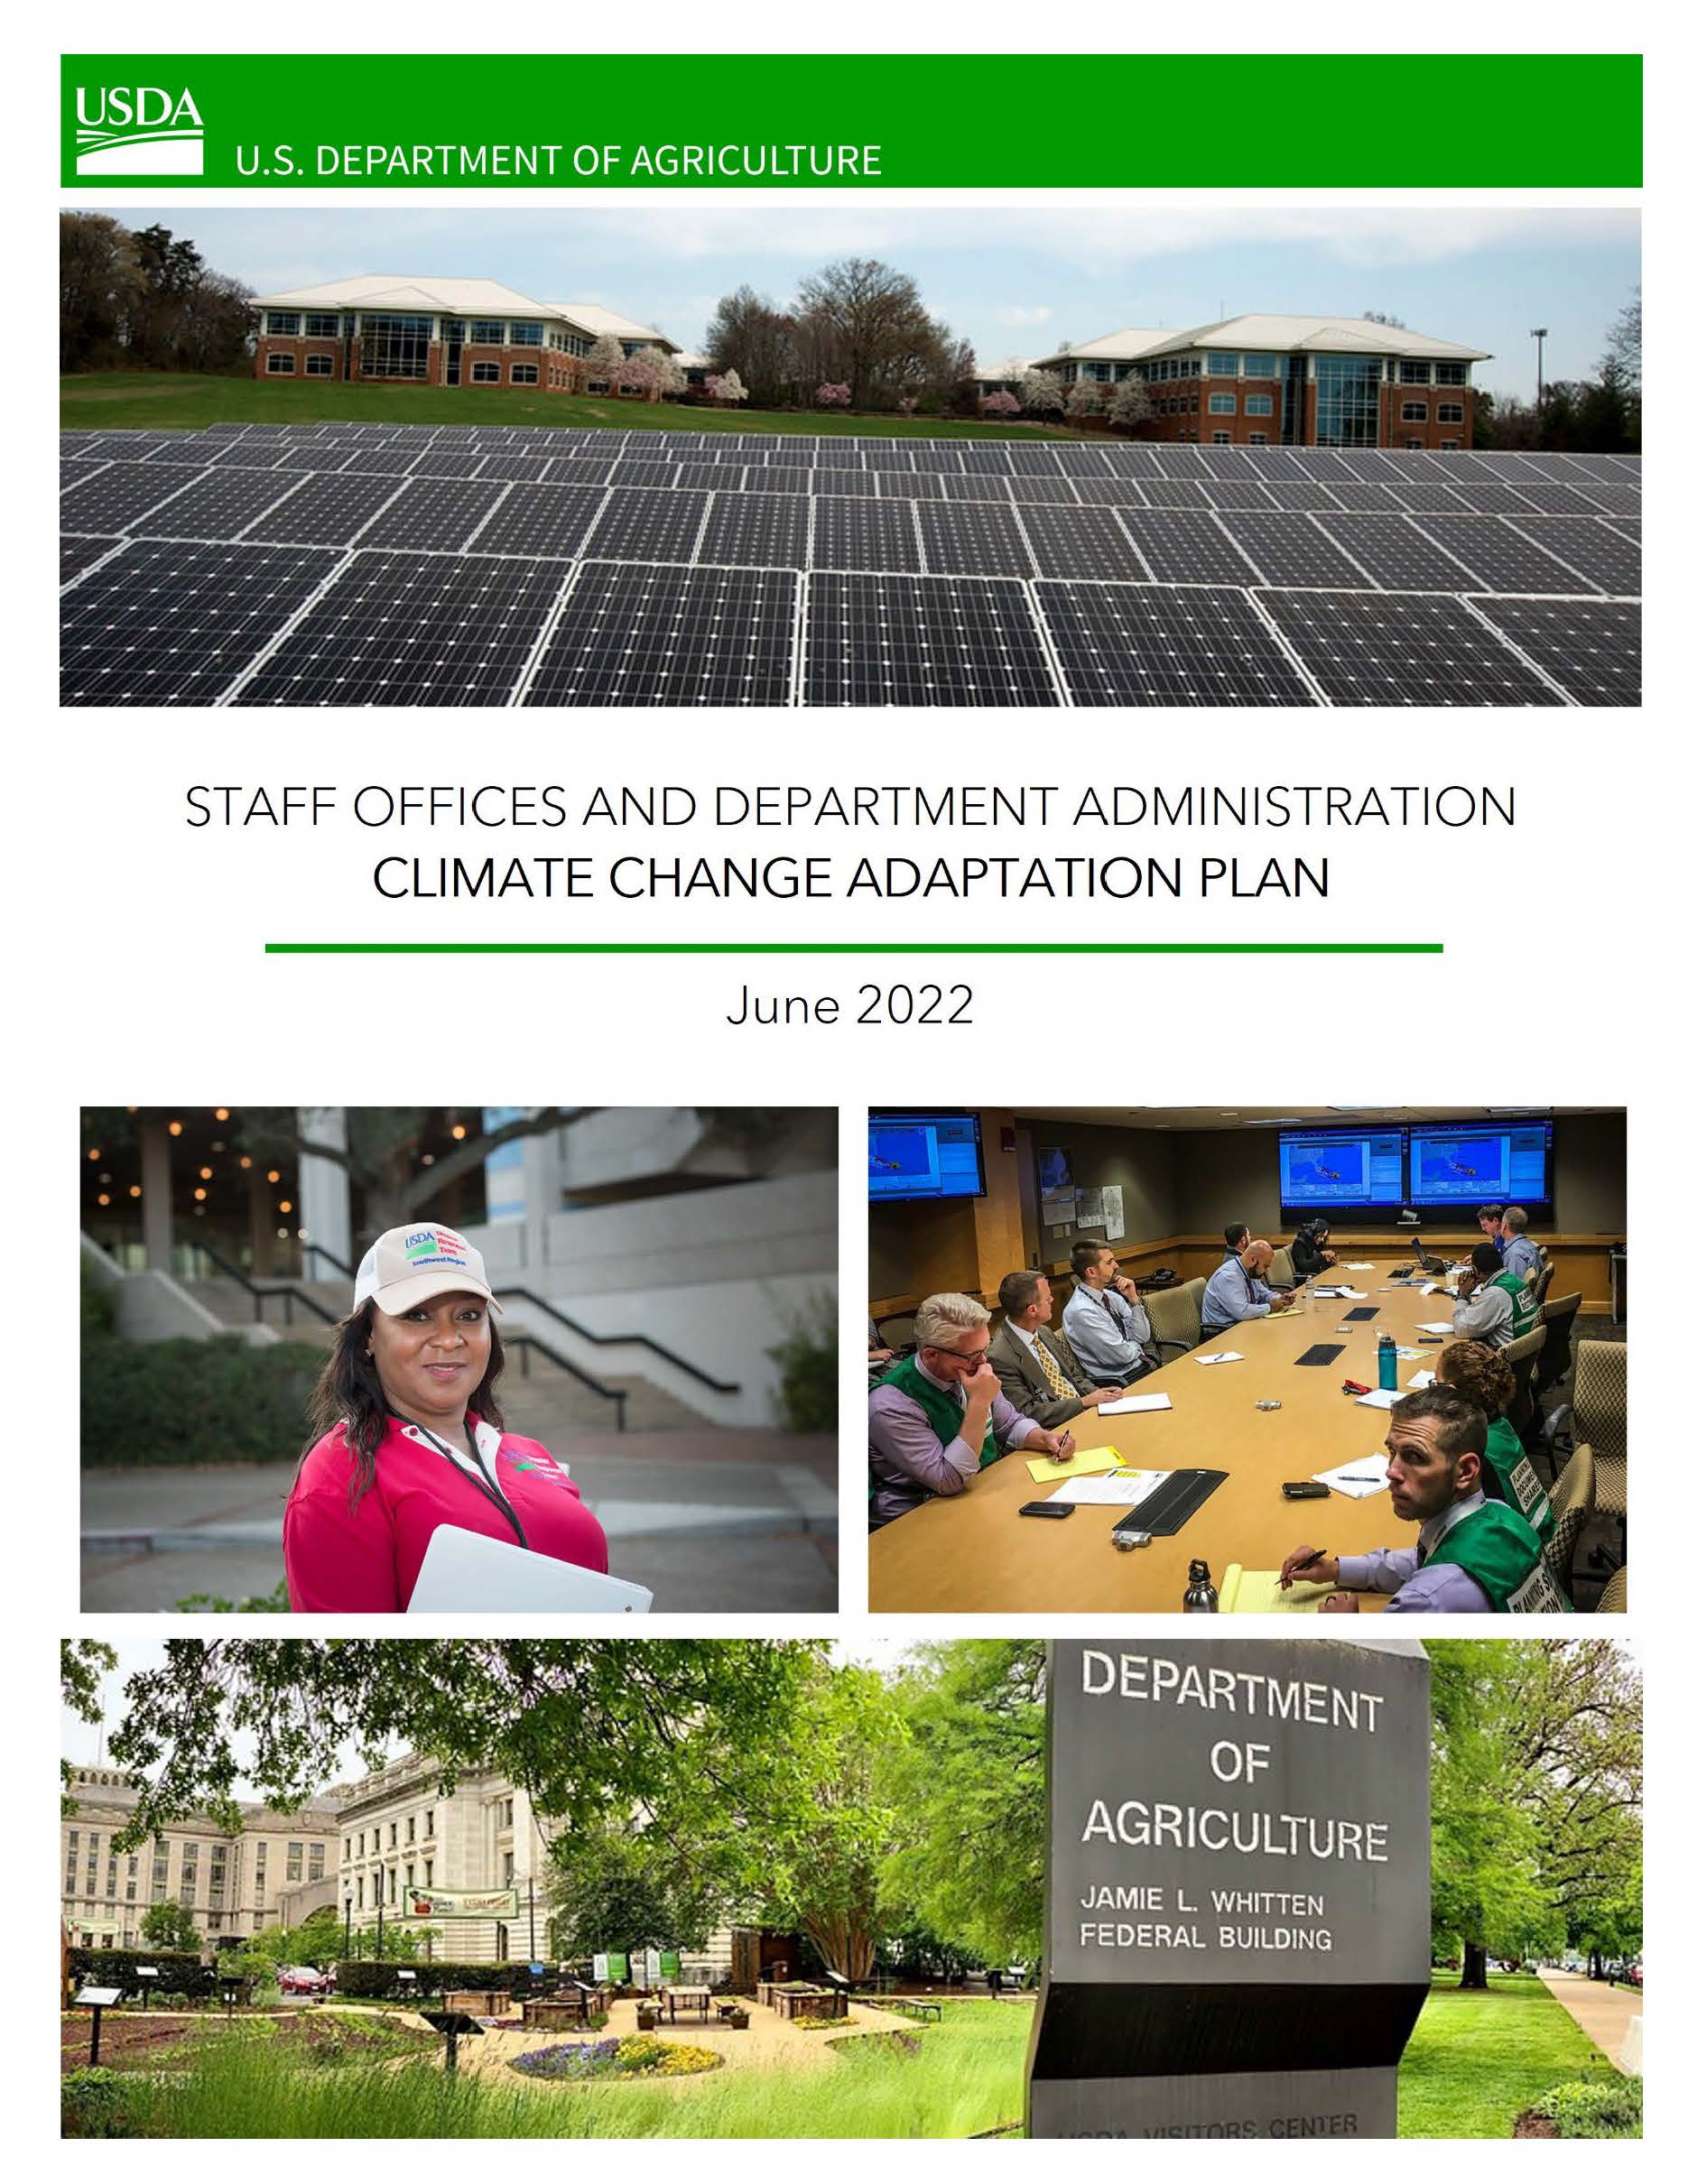 Cover page for the 2022 USDA Action Plan for Climate Adaptation and Resilience, mosaic of solar panels, people meeting at a conference table, a woman in front of a building, and the sign in front of the Whitten building.